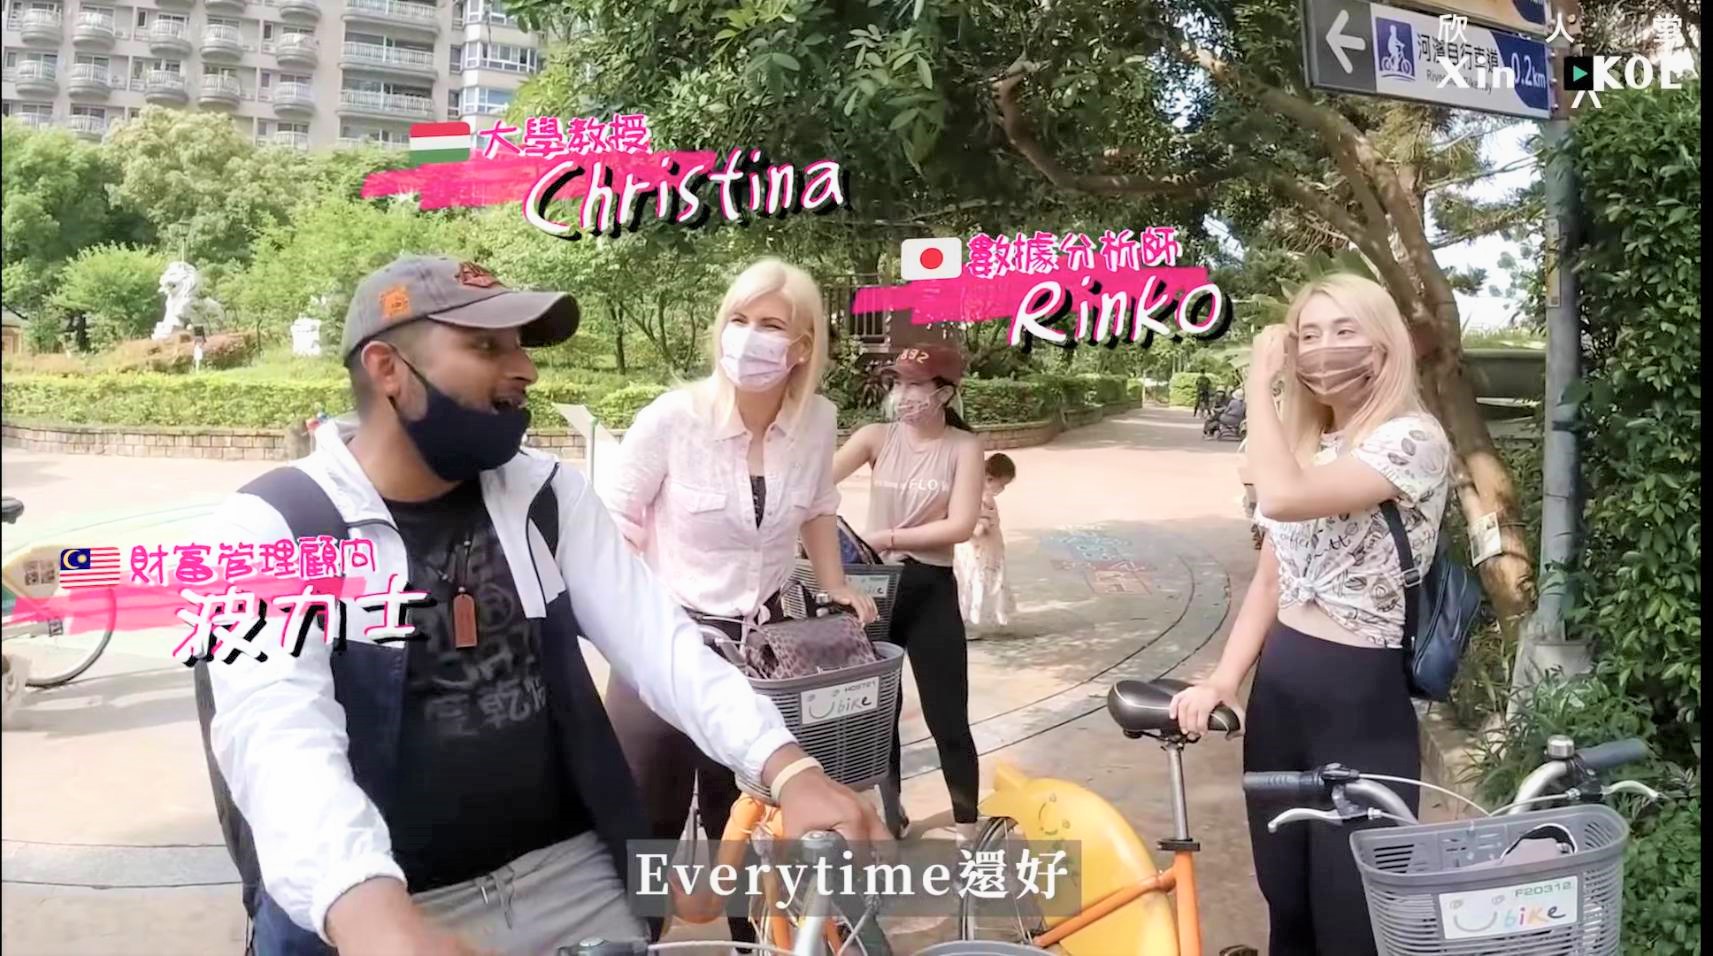 The four YouTubers go cycling around the riverbank of Bitan    （Photo／Authorized & Provided by老外在幹嘛）